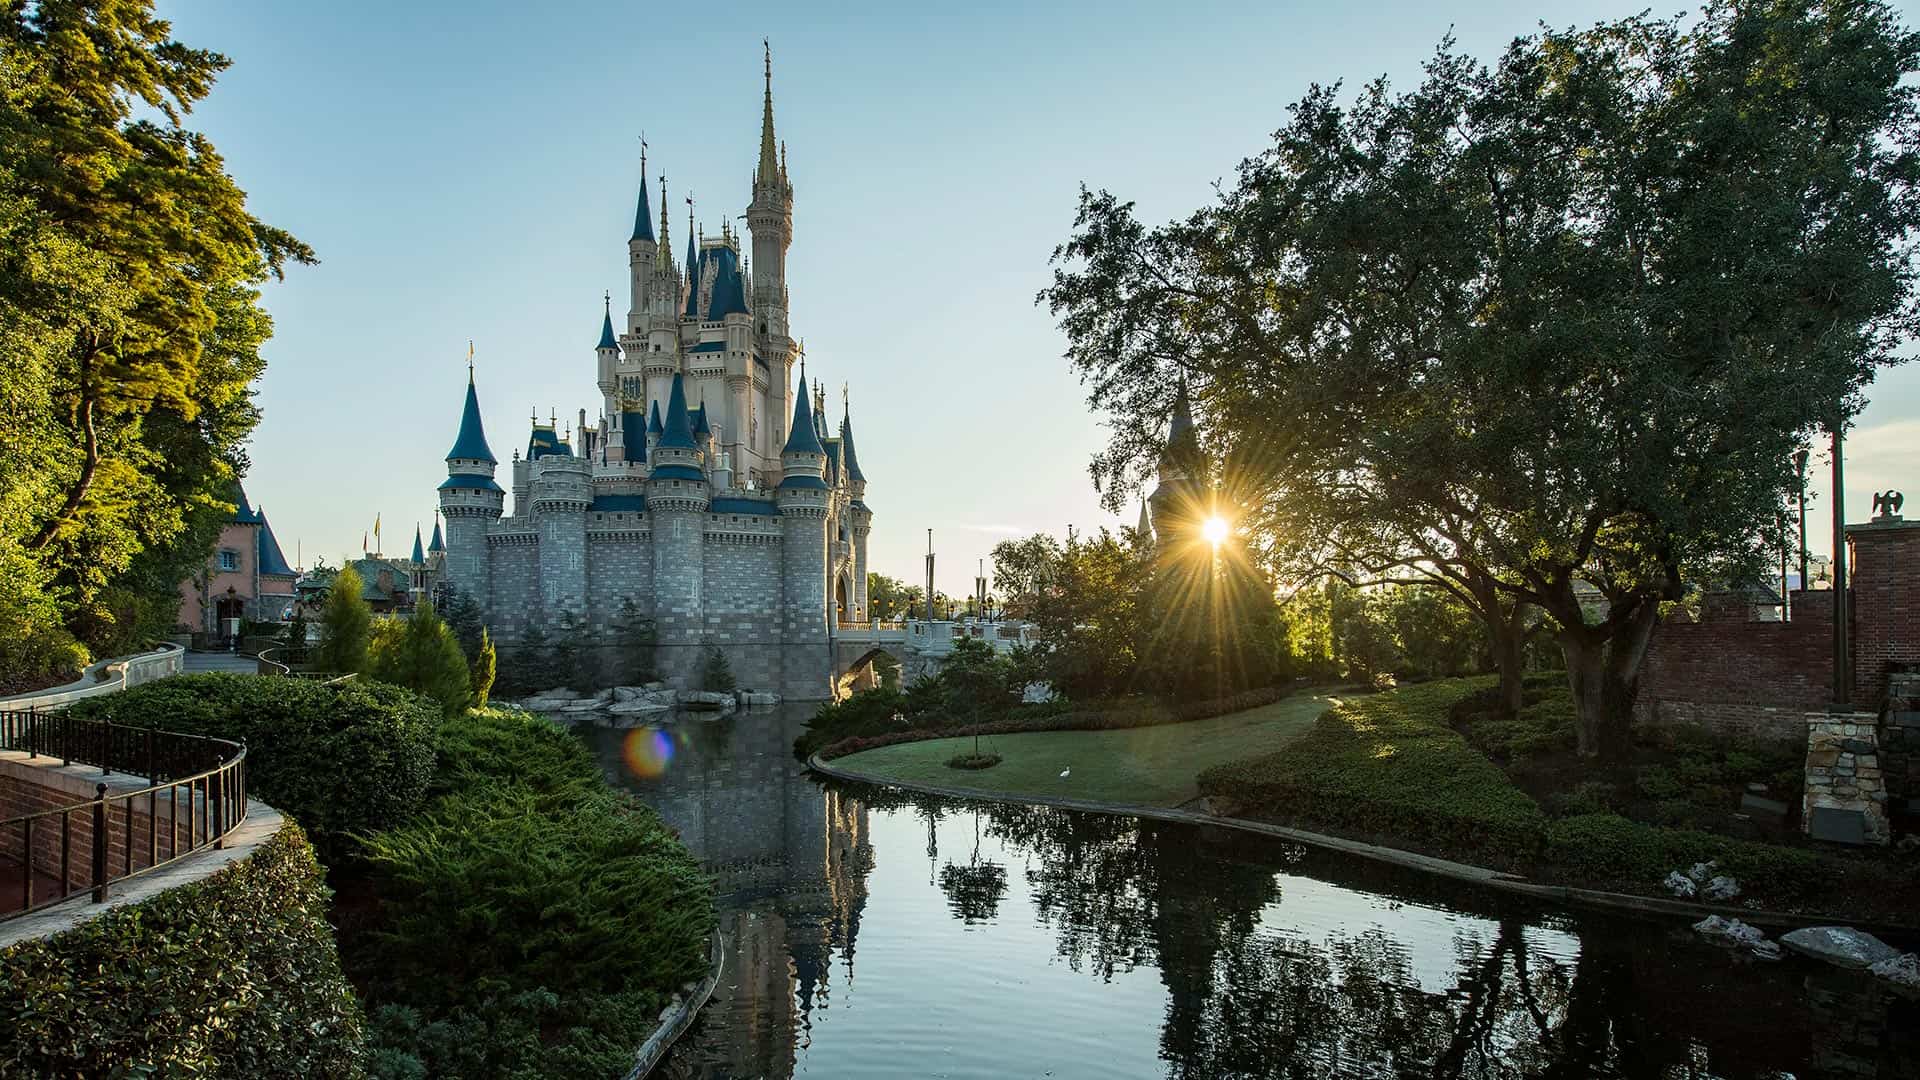 Orlando Theme Park: Treat Yourself to Magic in Paradise at a theme park